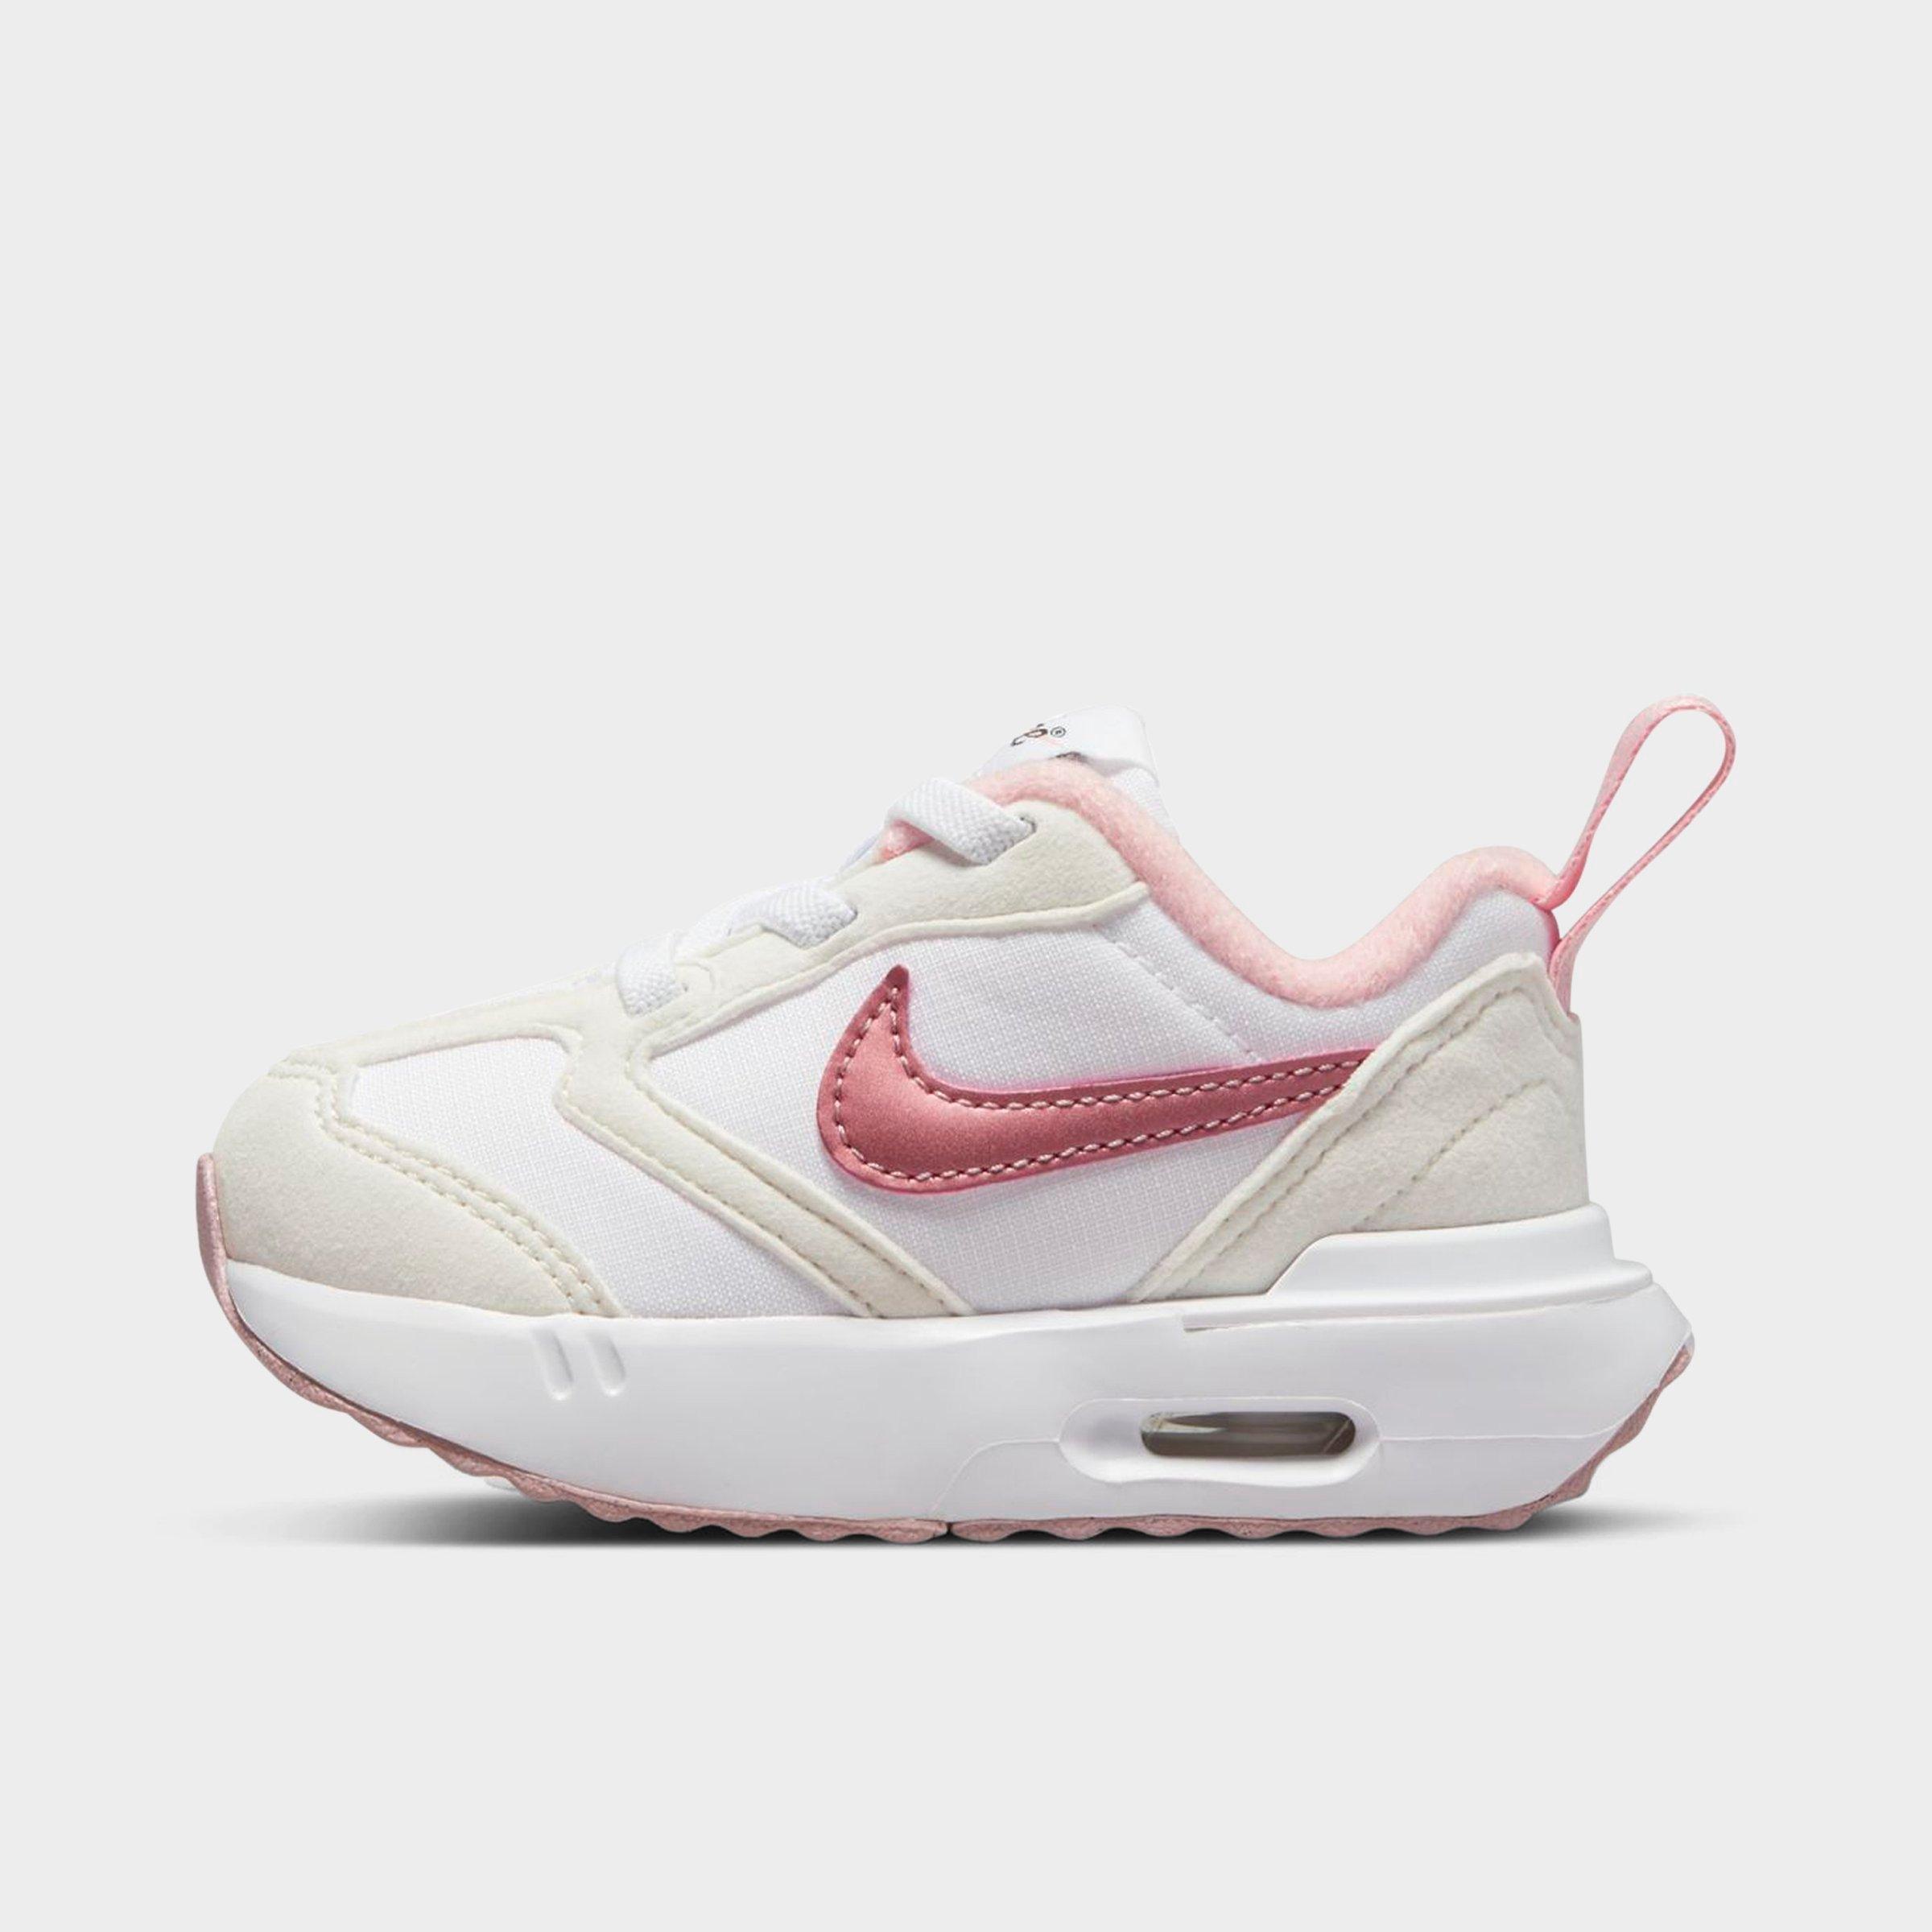 Nike Babies'  Kids' Toddler Air Max Dawn Casual Shoes In White/pink Glaze/summit White/black